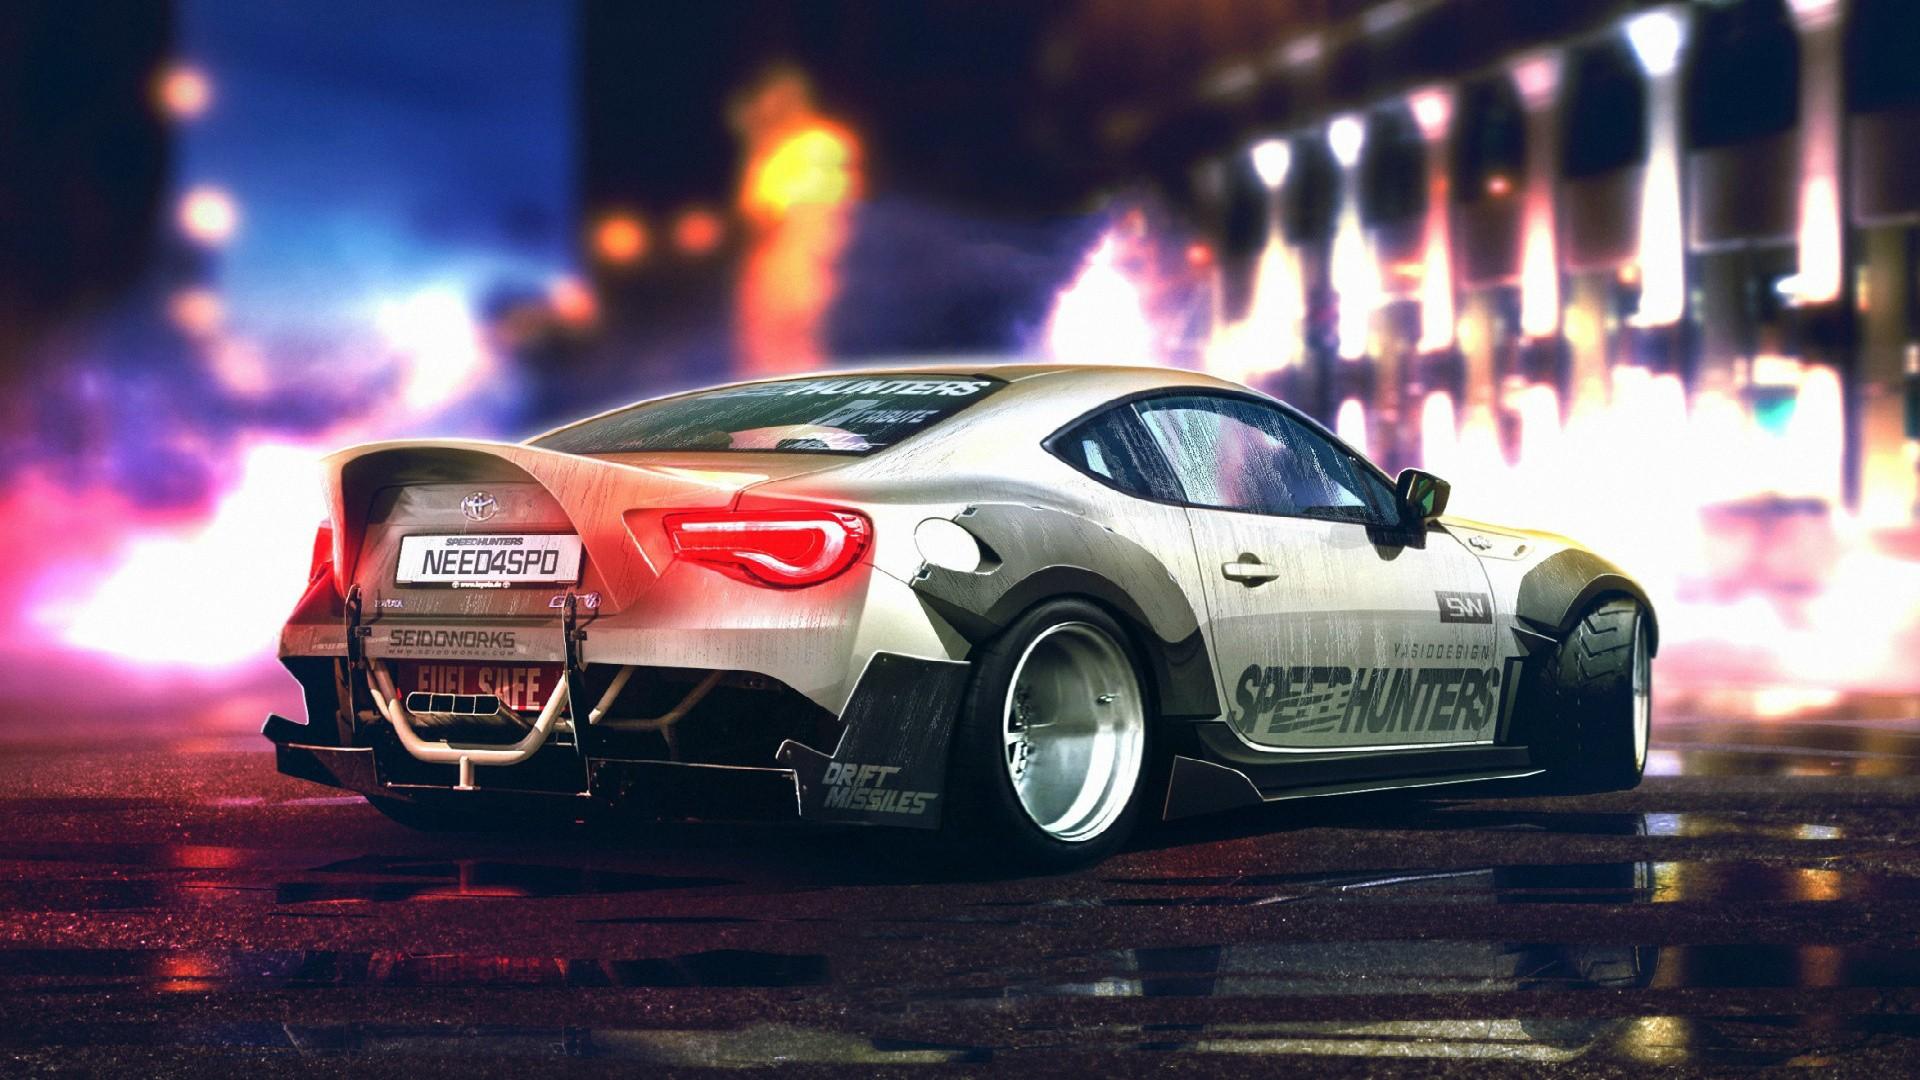 #Need for Speed, #car, #Toyota, #Speedhunters wallpaper